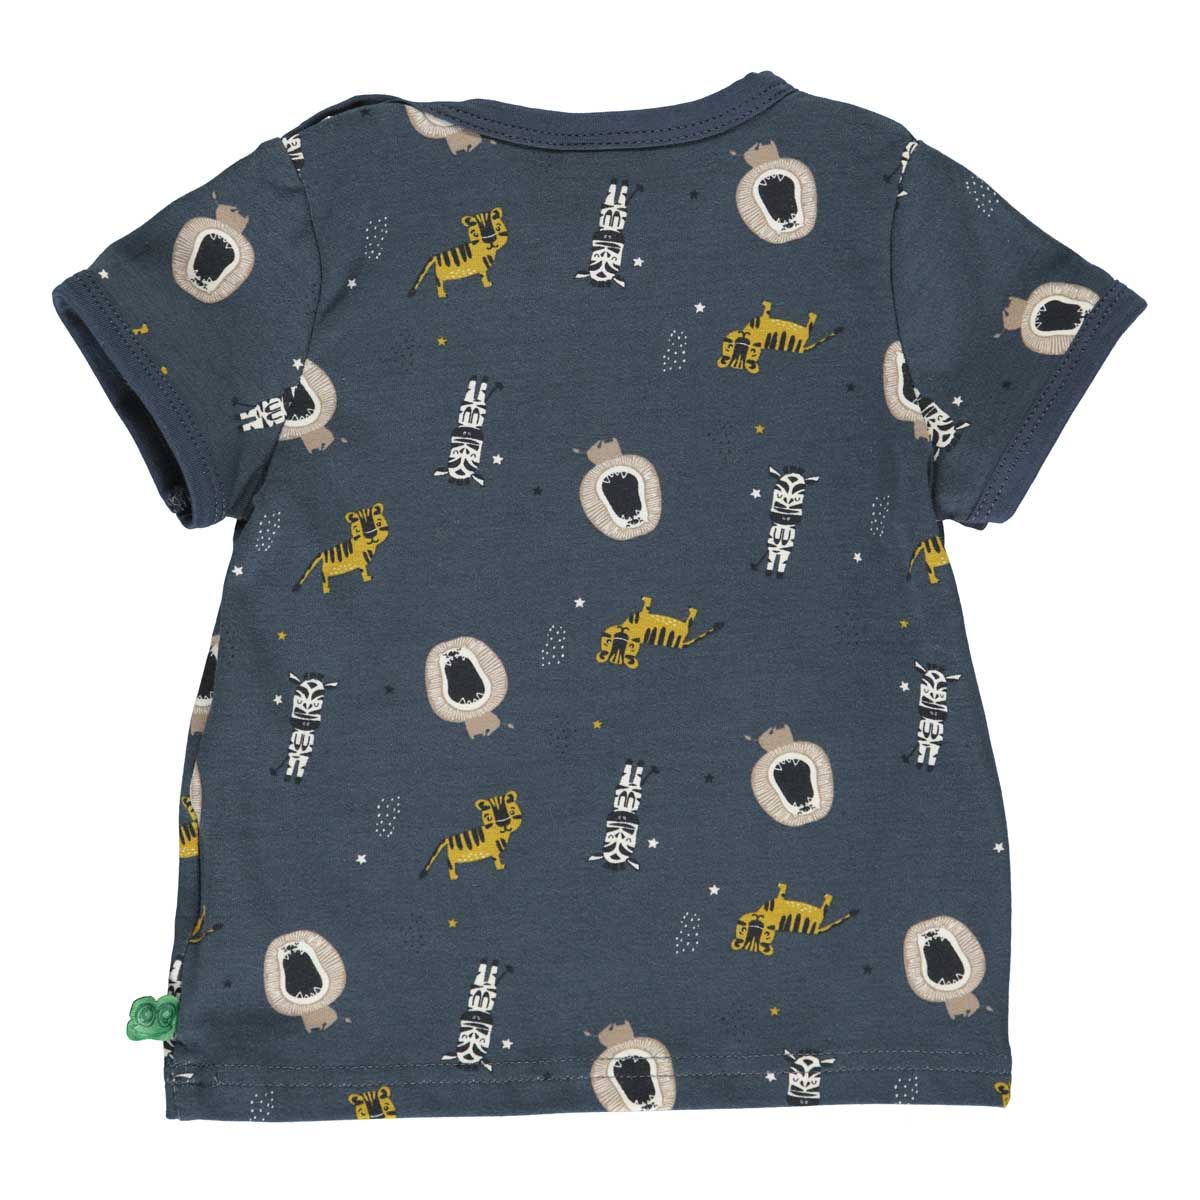 T-Shirt Zootiere ( 12-18 Monate) Fred s World